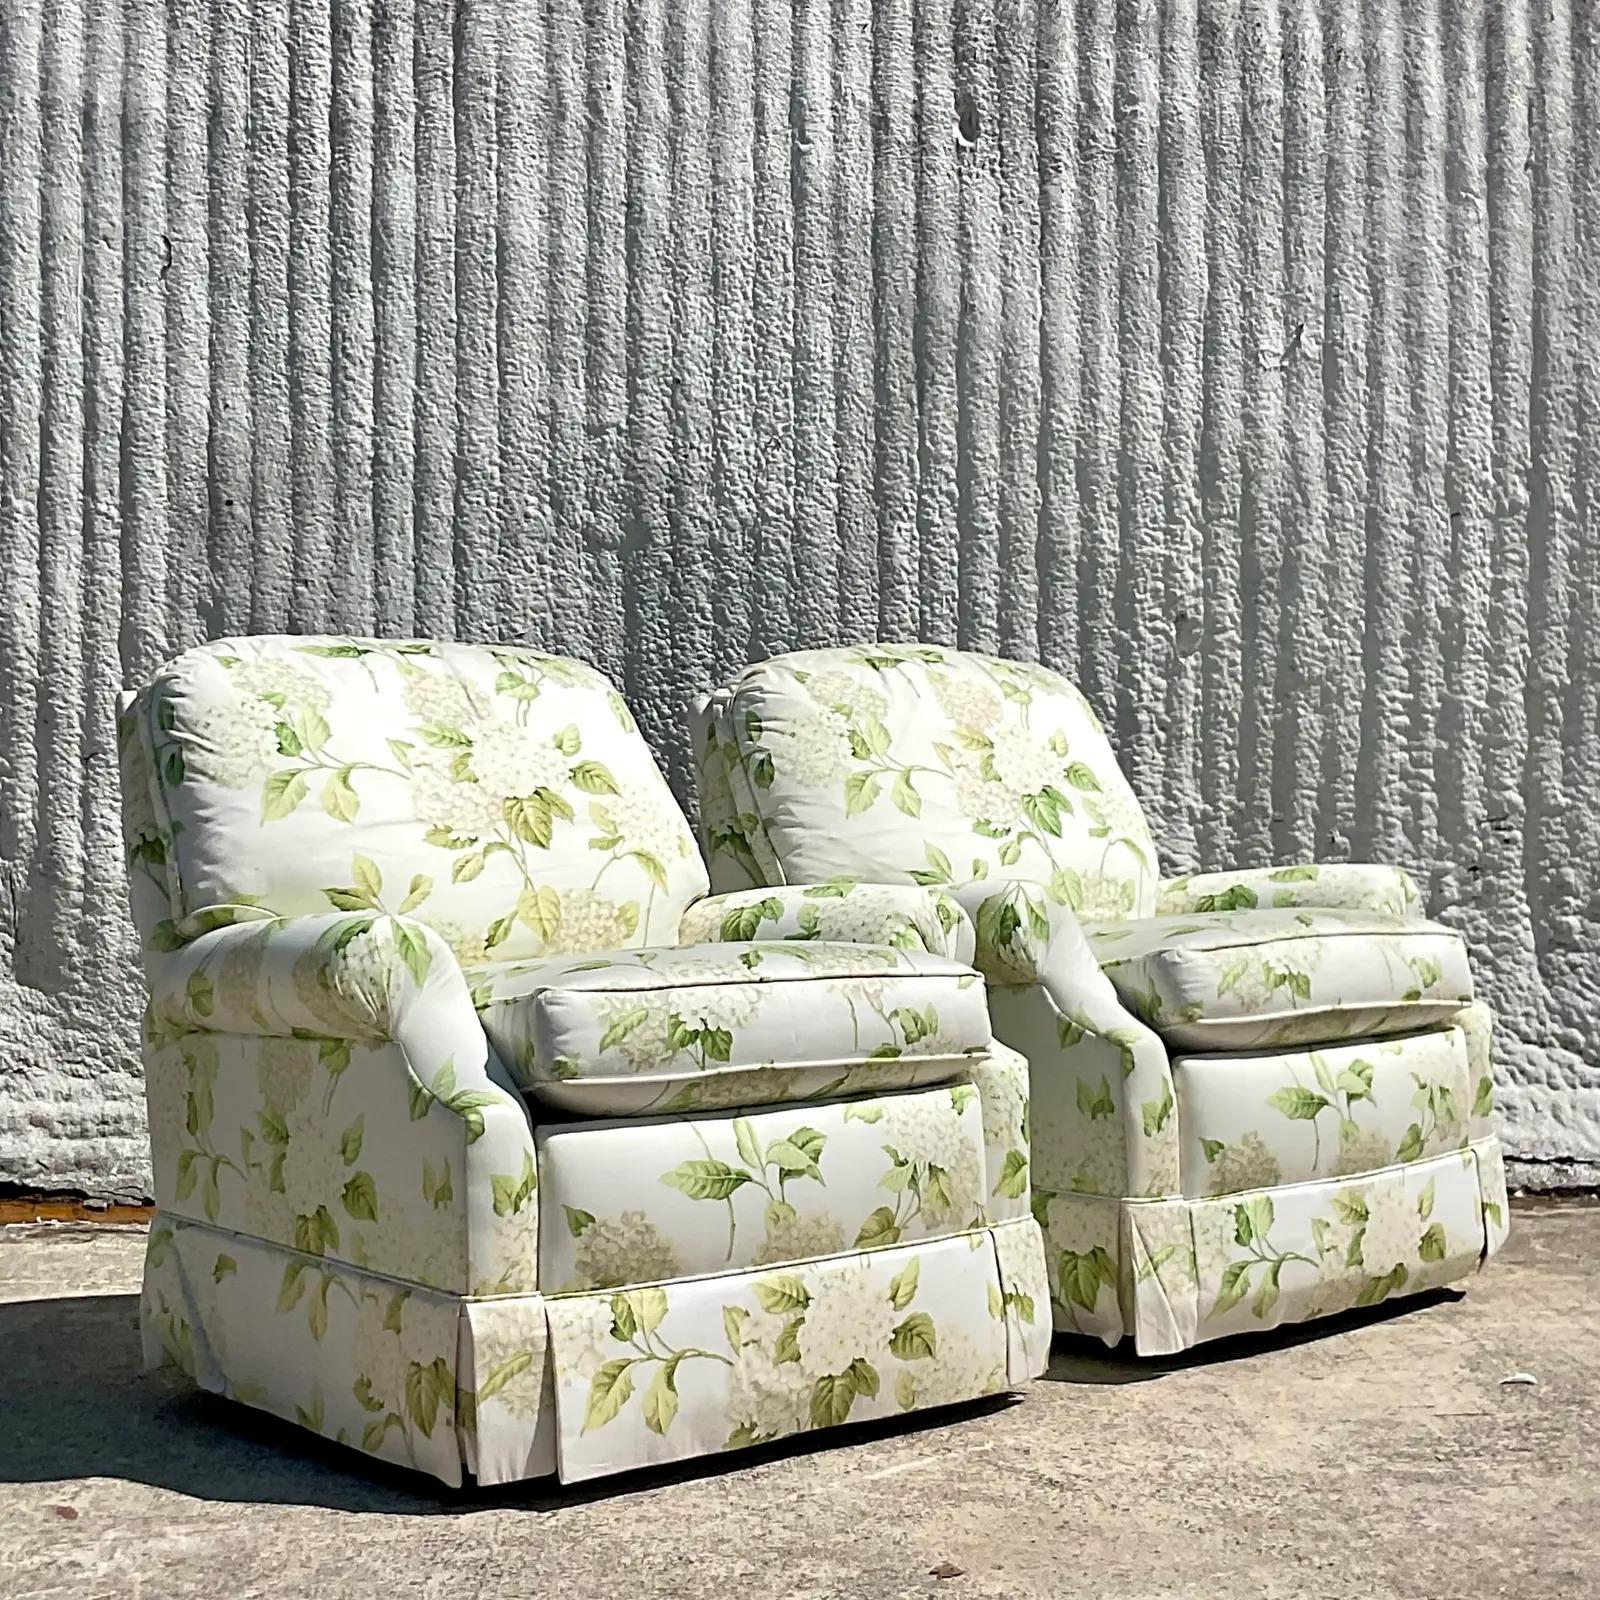 A fabulous pair of vintage Regency swivel rocker chairs. Made by the Sherrill group and upholstered in a Thibaut Hydrangea printed cotton sateen. Acquired from a Palm Beach estate.